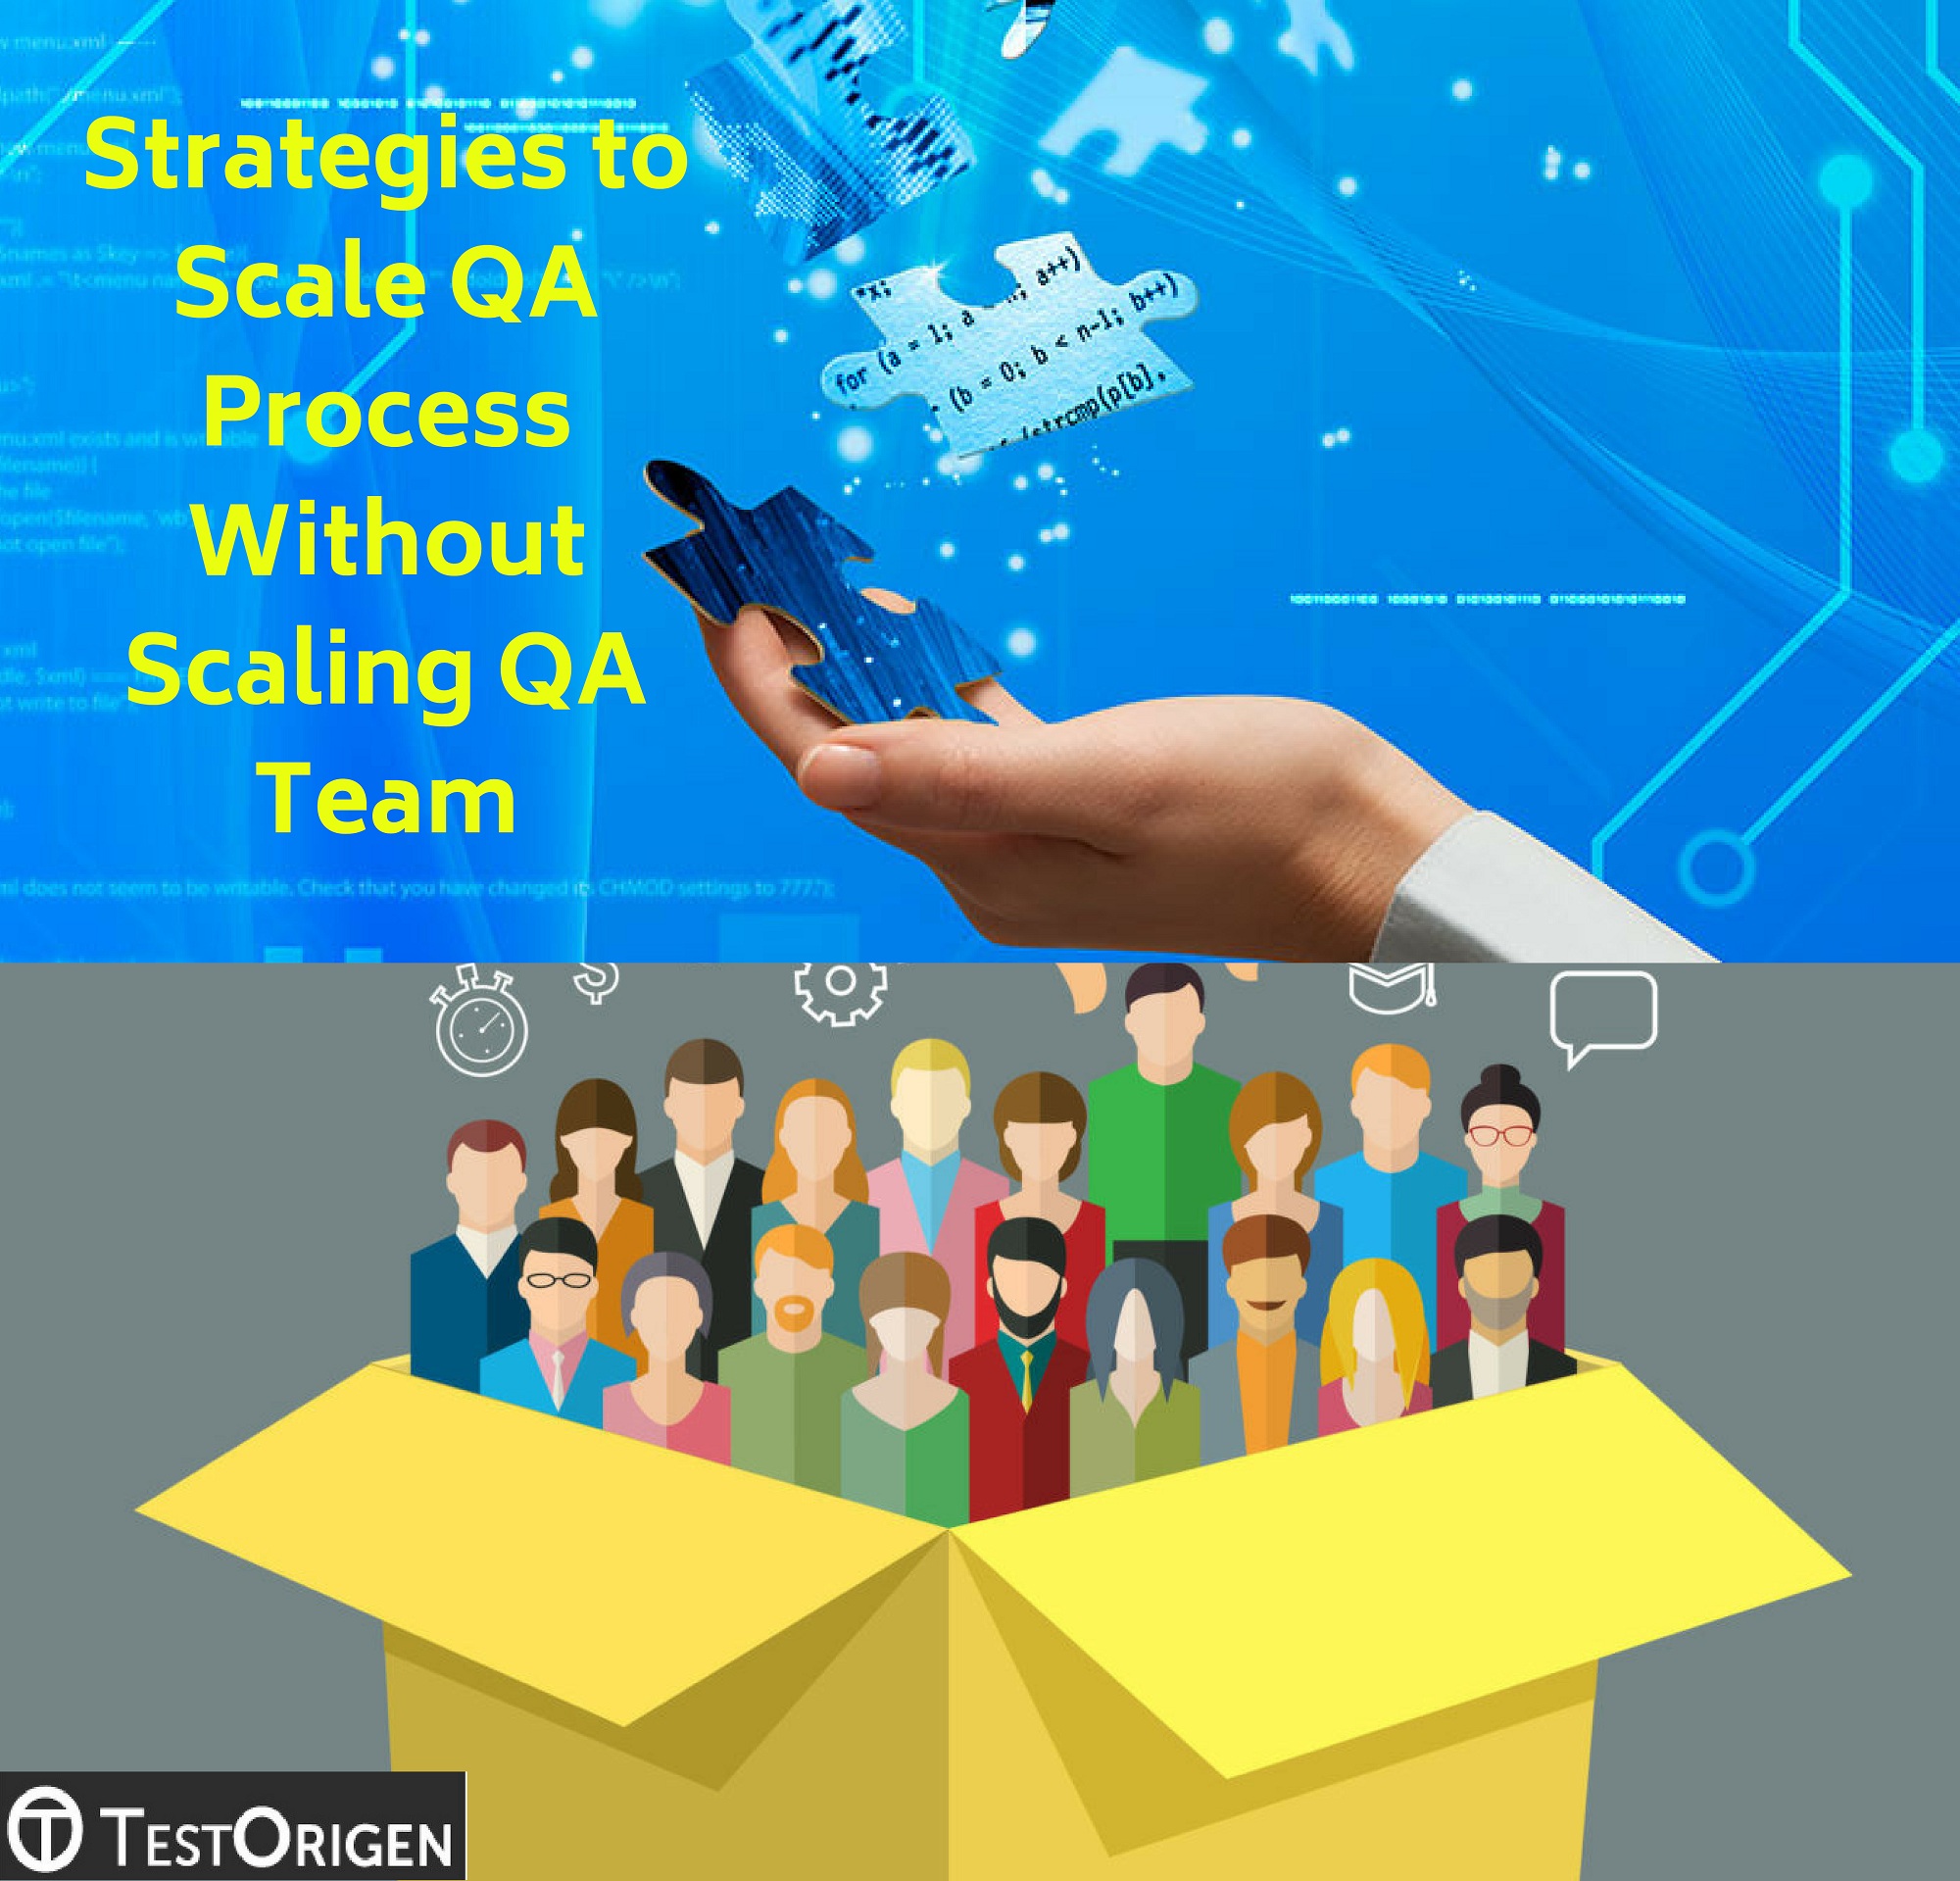 Strategies to Scale QA Process Without Scaling QA Team